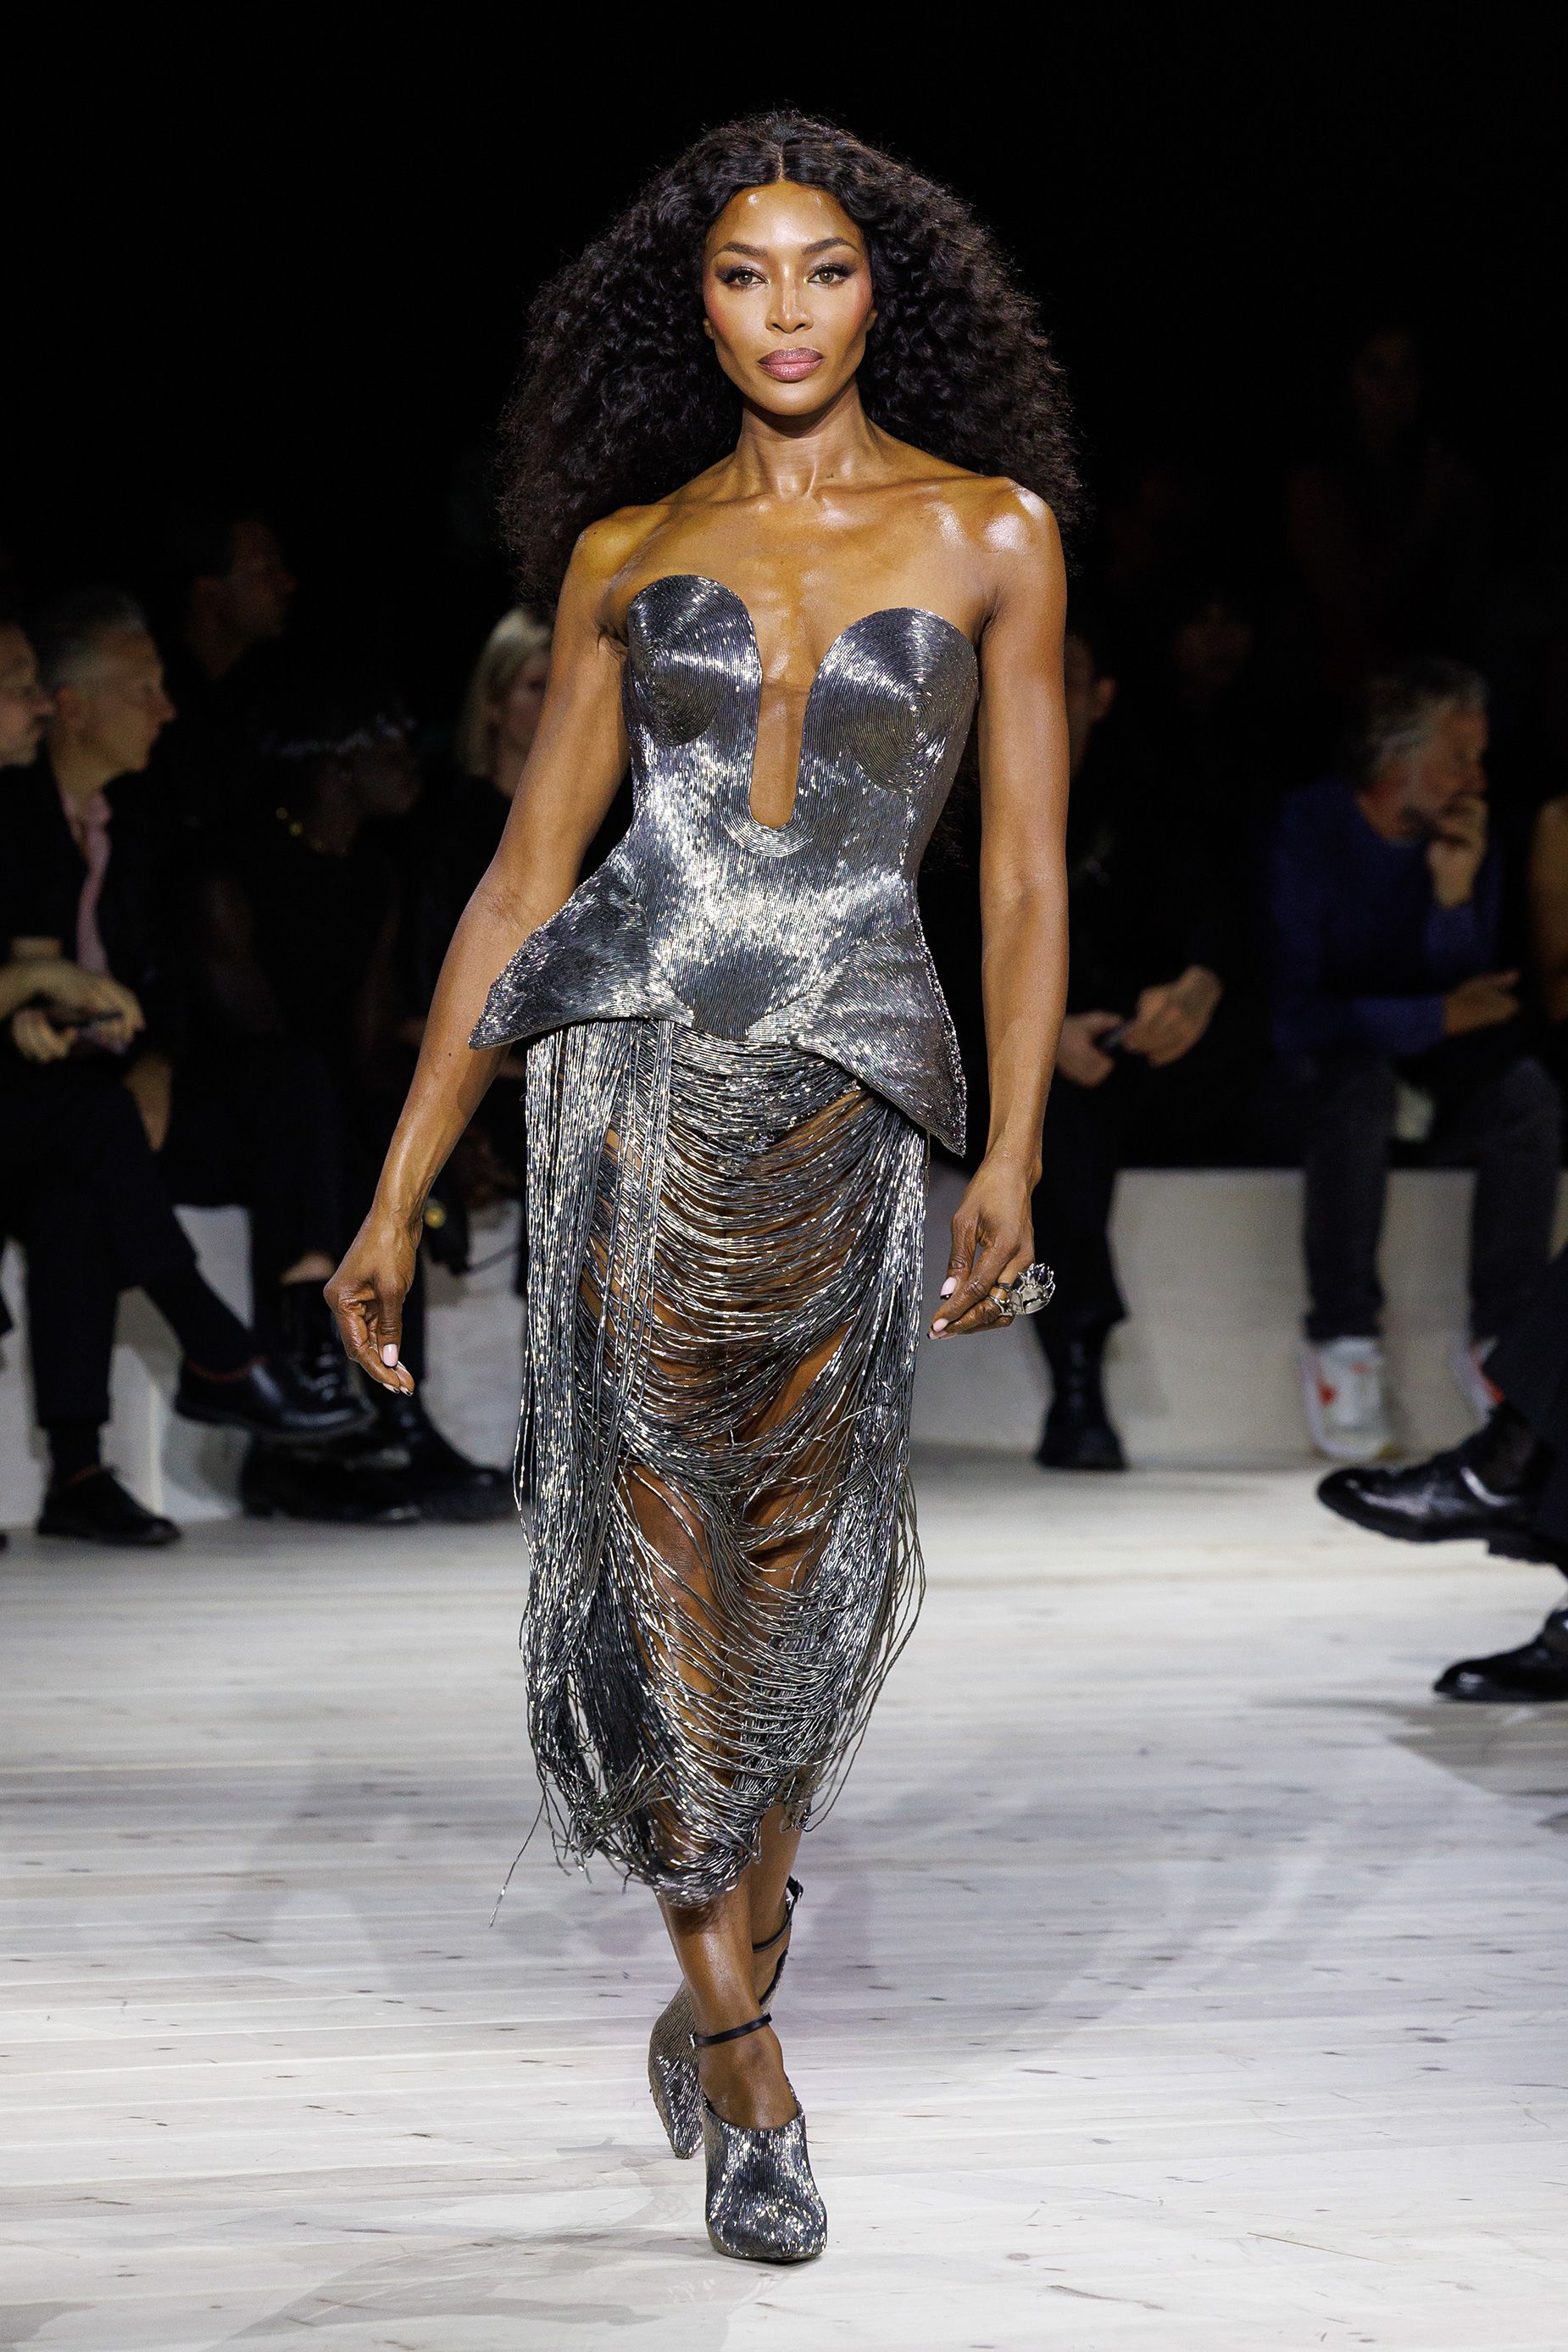 Naomi Campbell closed the show to a standing ovation from showgoers, wiping tears from her face.